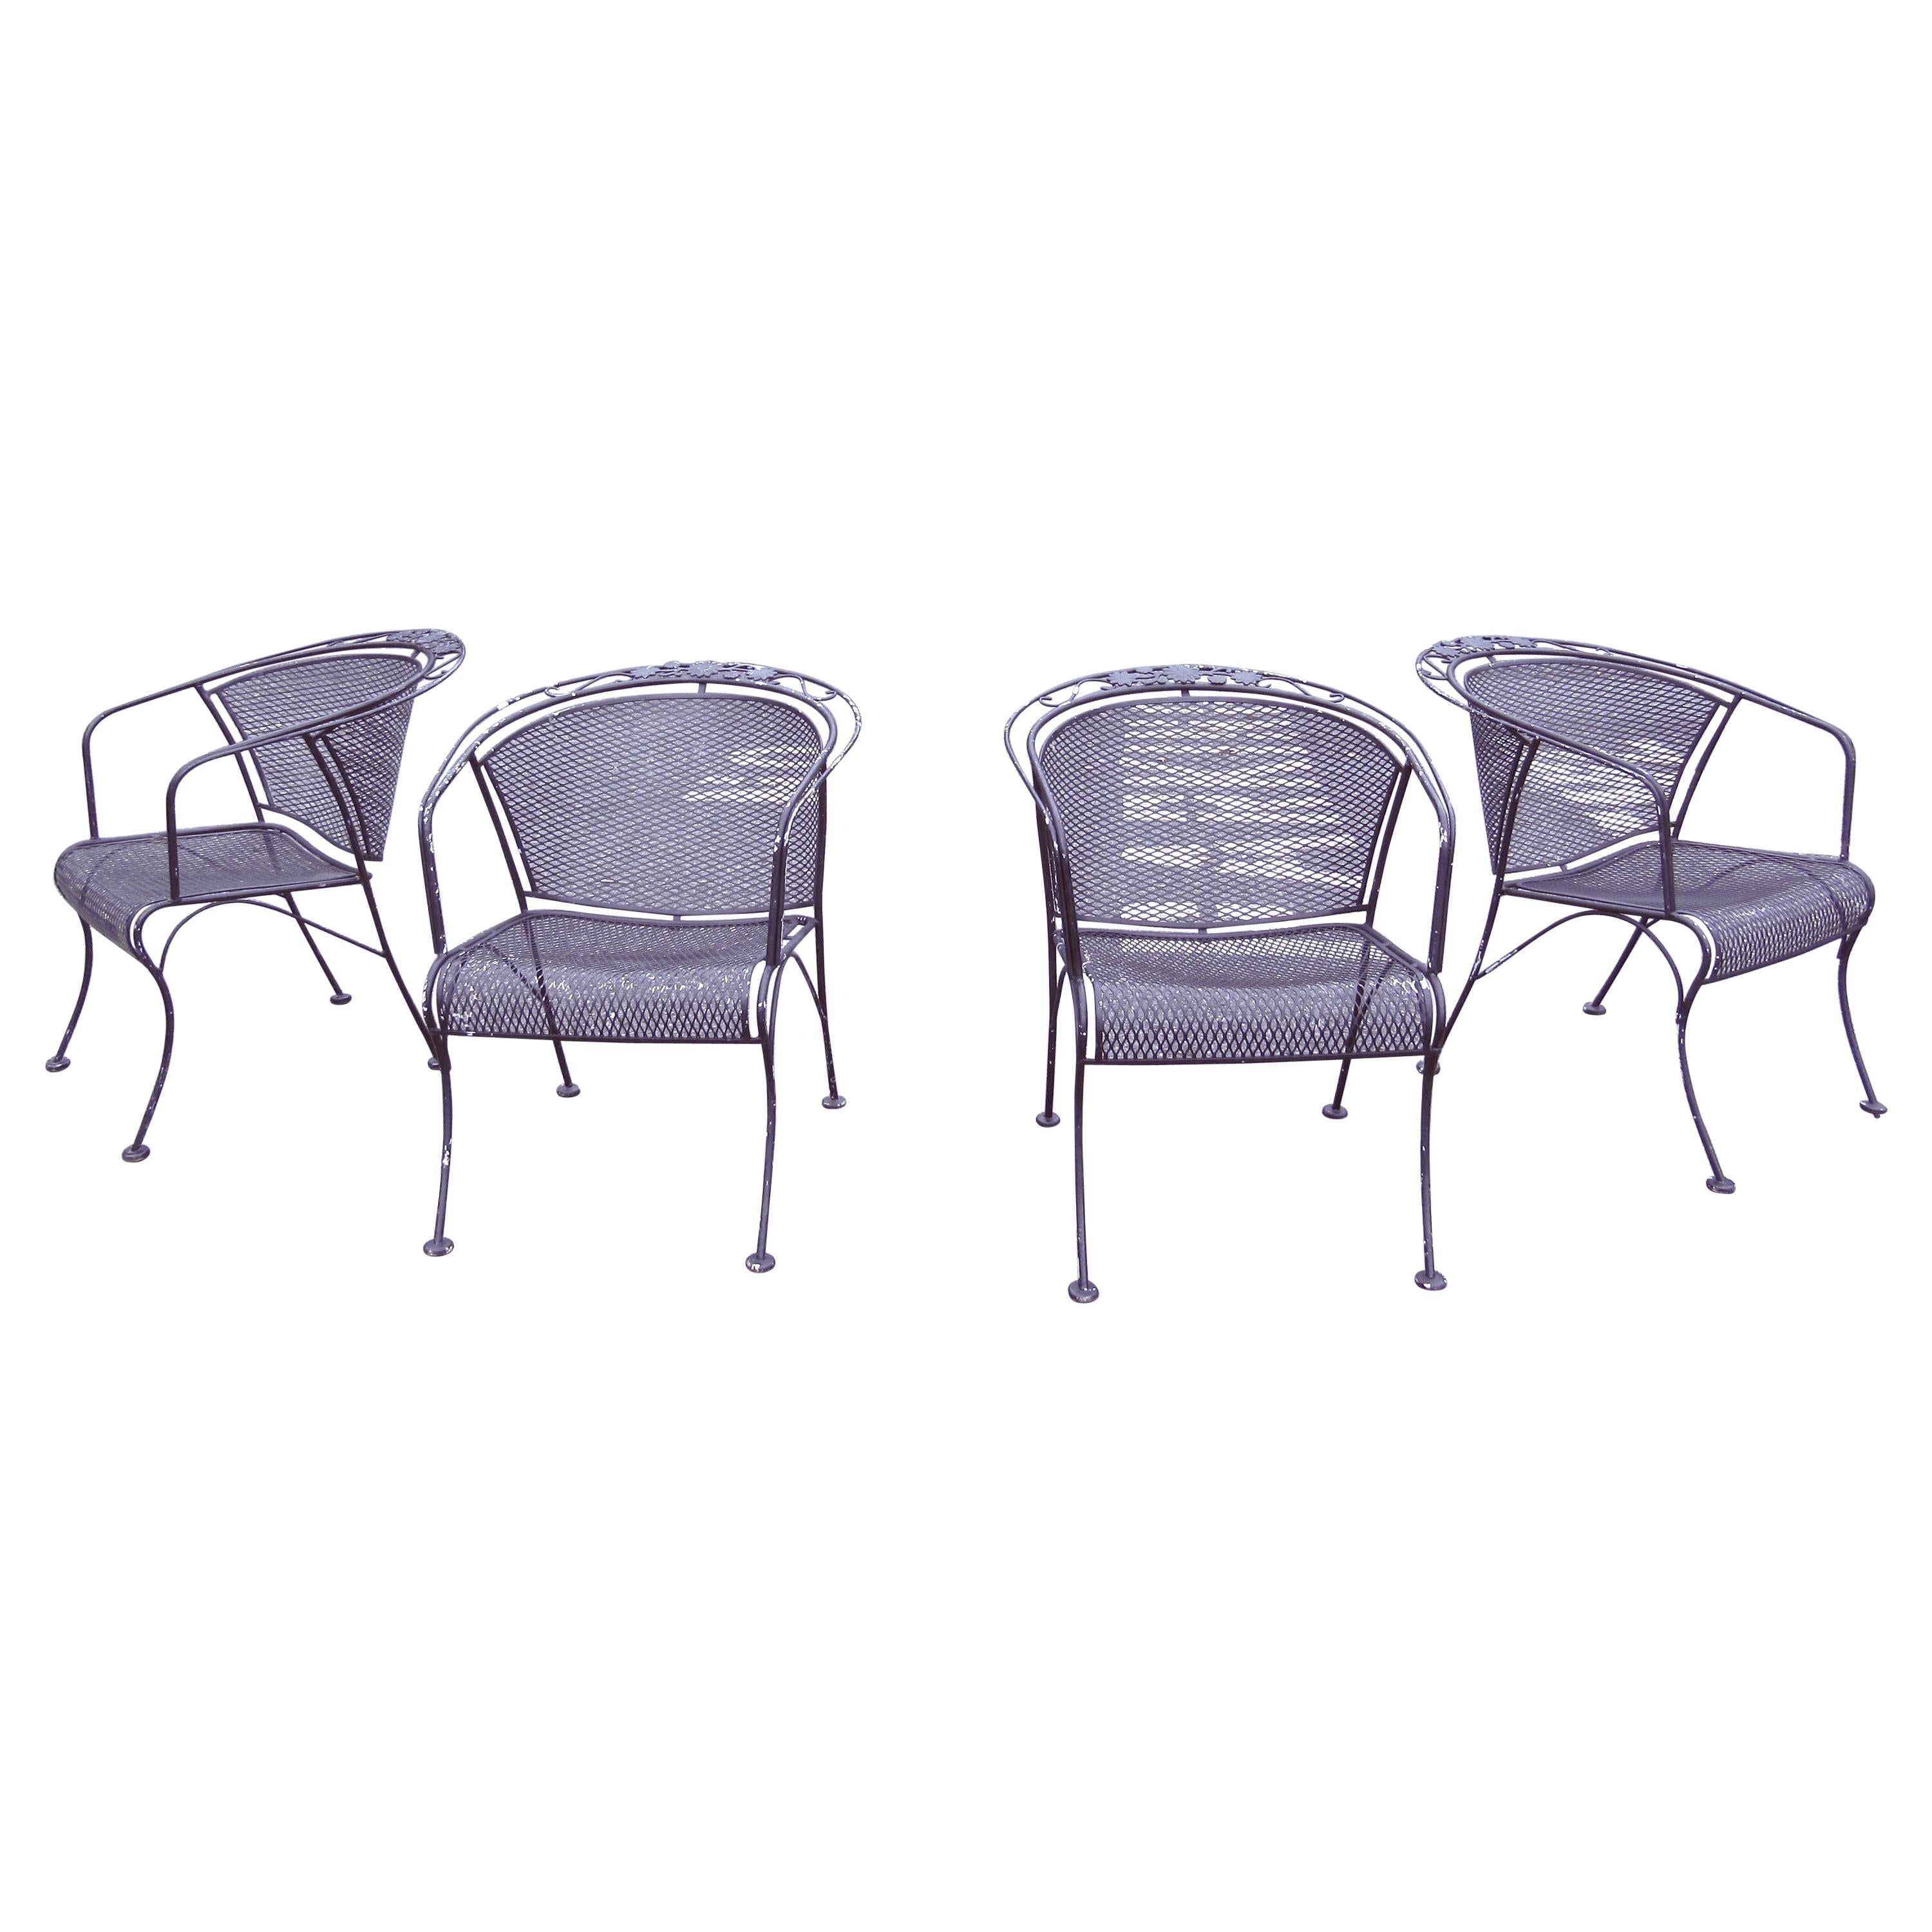 Set of 4 Iron Patio Chairs by Russell Woodard